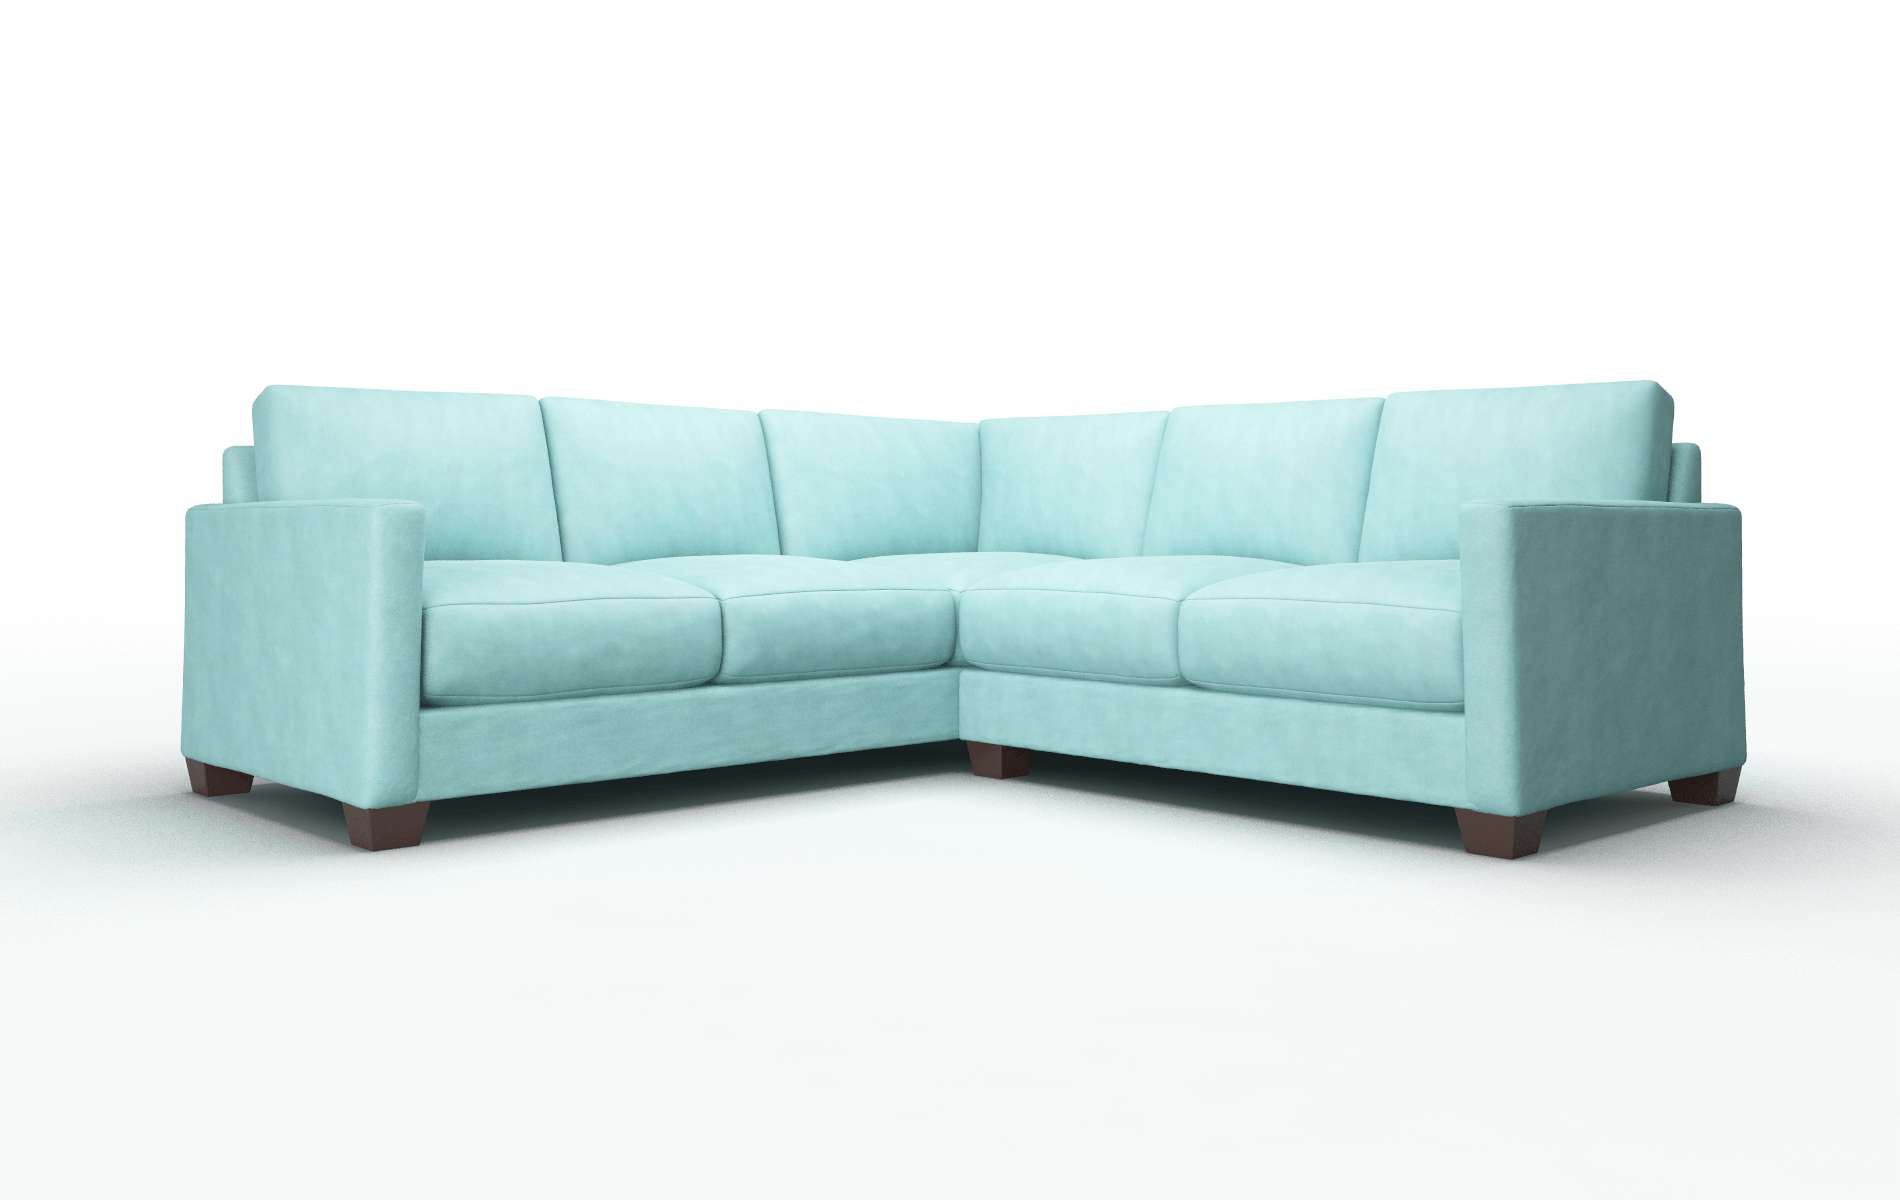 Dresden Curious Turquoise Sectional espresso legs